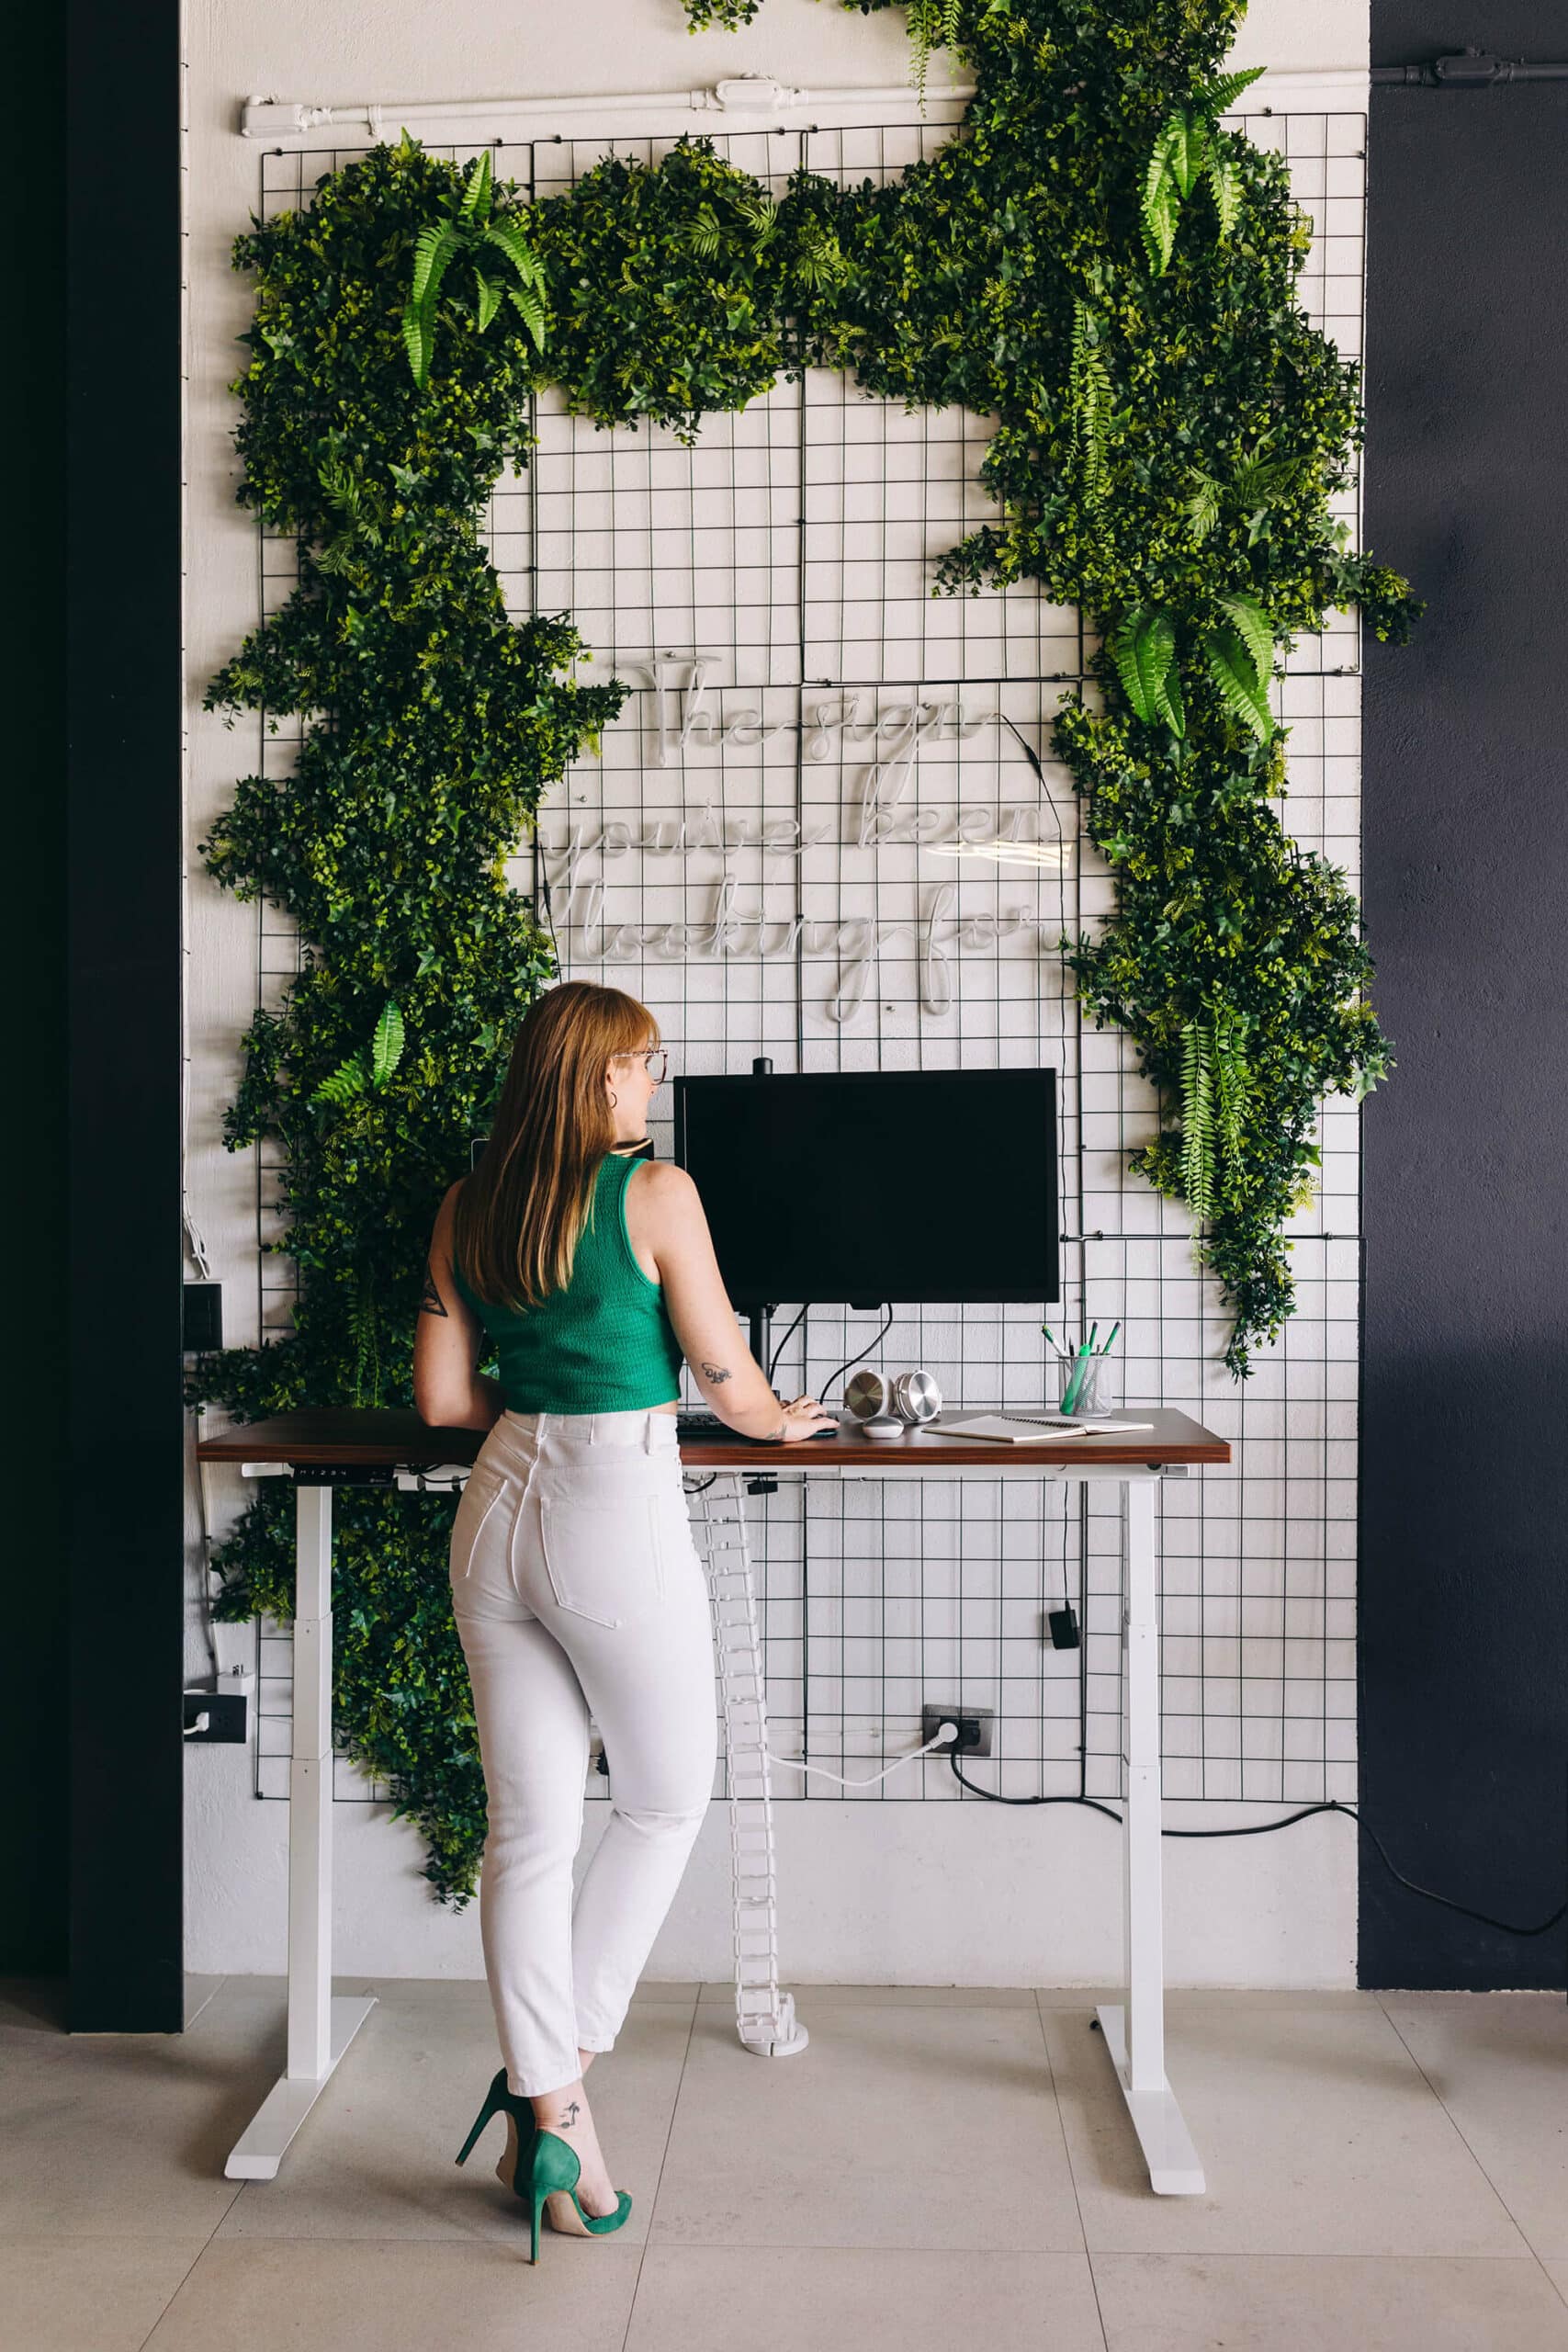 A woman in a green sleeveless top and white pants stands at a standing desk with a computer monitor, facing a grid wall with lush green foliage. She is viewed from the side and appears to be working or studying.